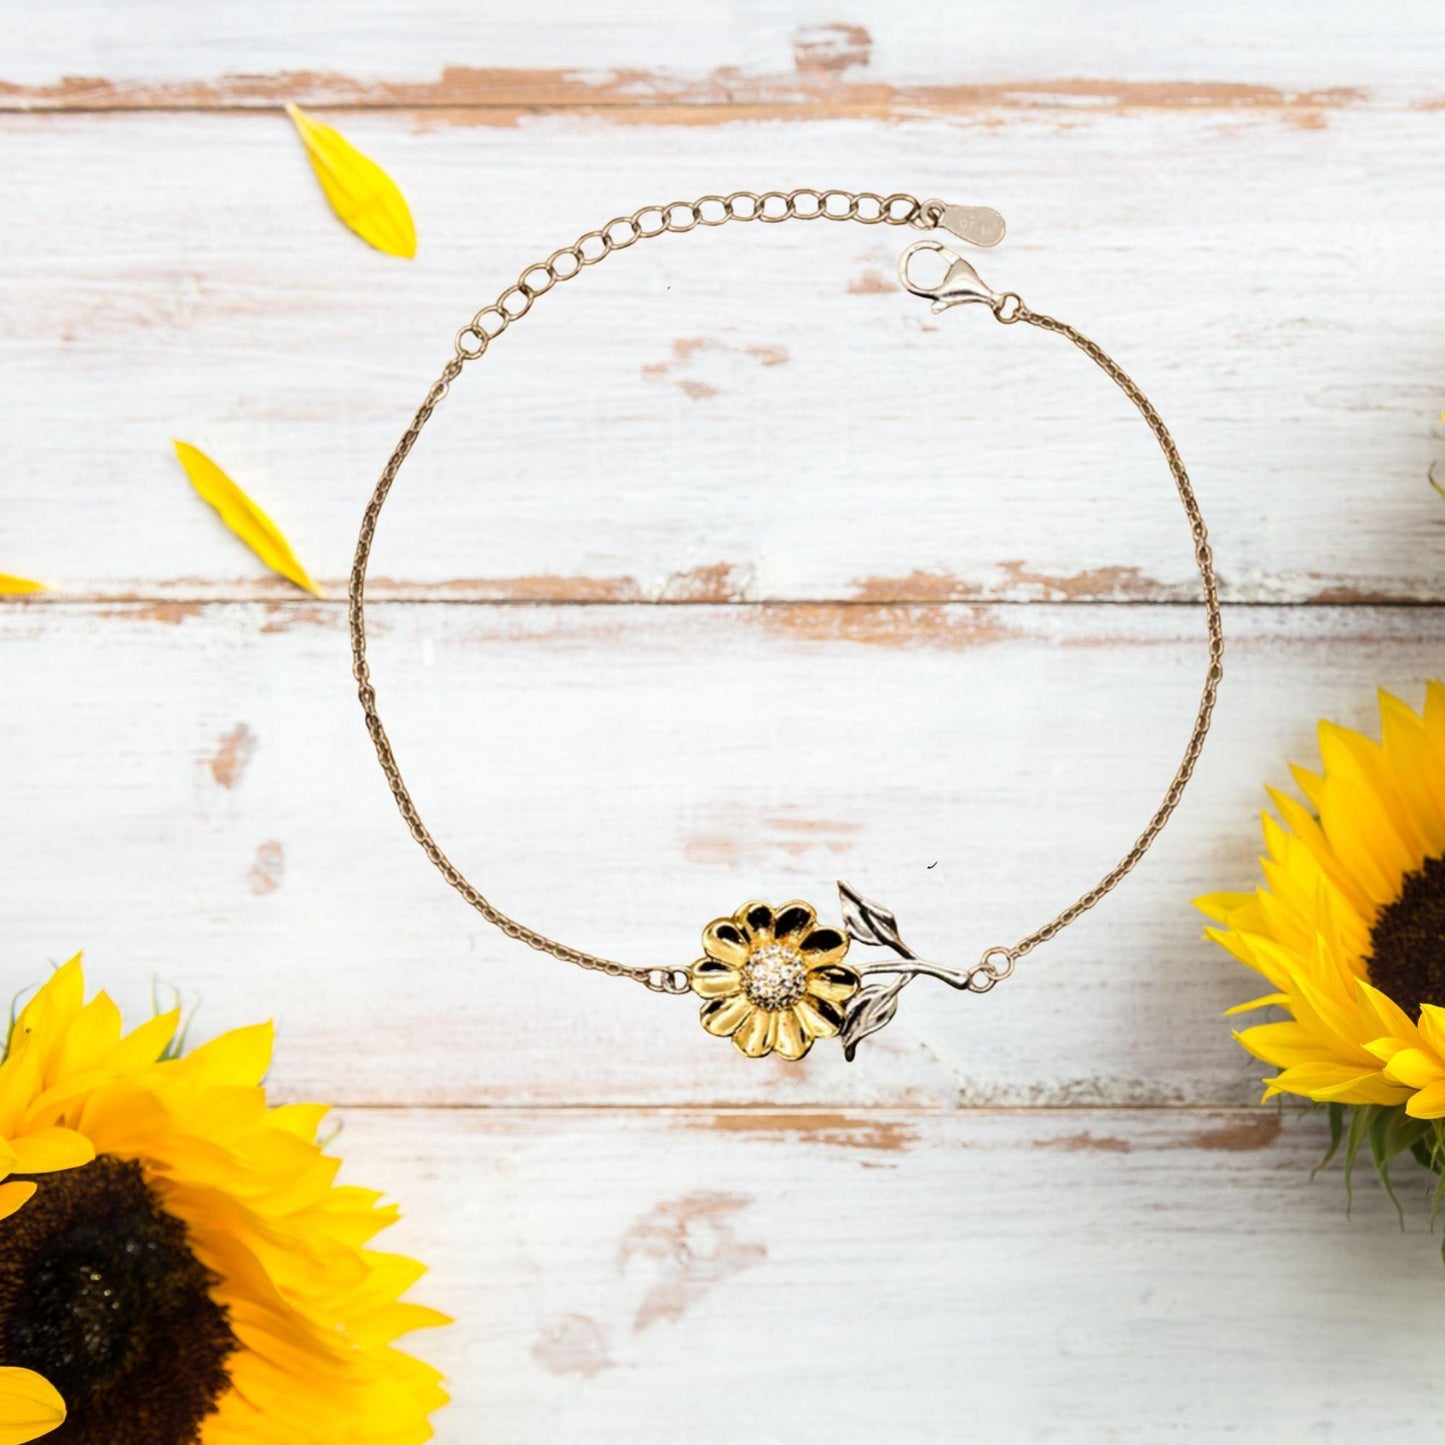 Bookbinder Sunflower Bracelet - Thanks for being who you are - Birthday Christmas Jewelry Gifts Coworkers Colleague Boss - Mallard Moon Gift Shop